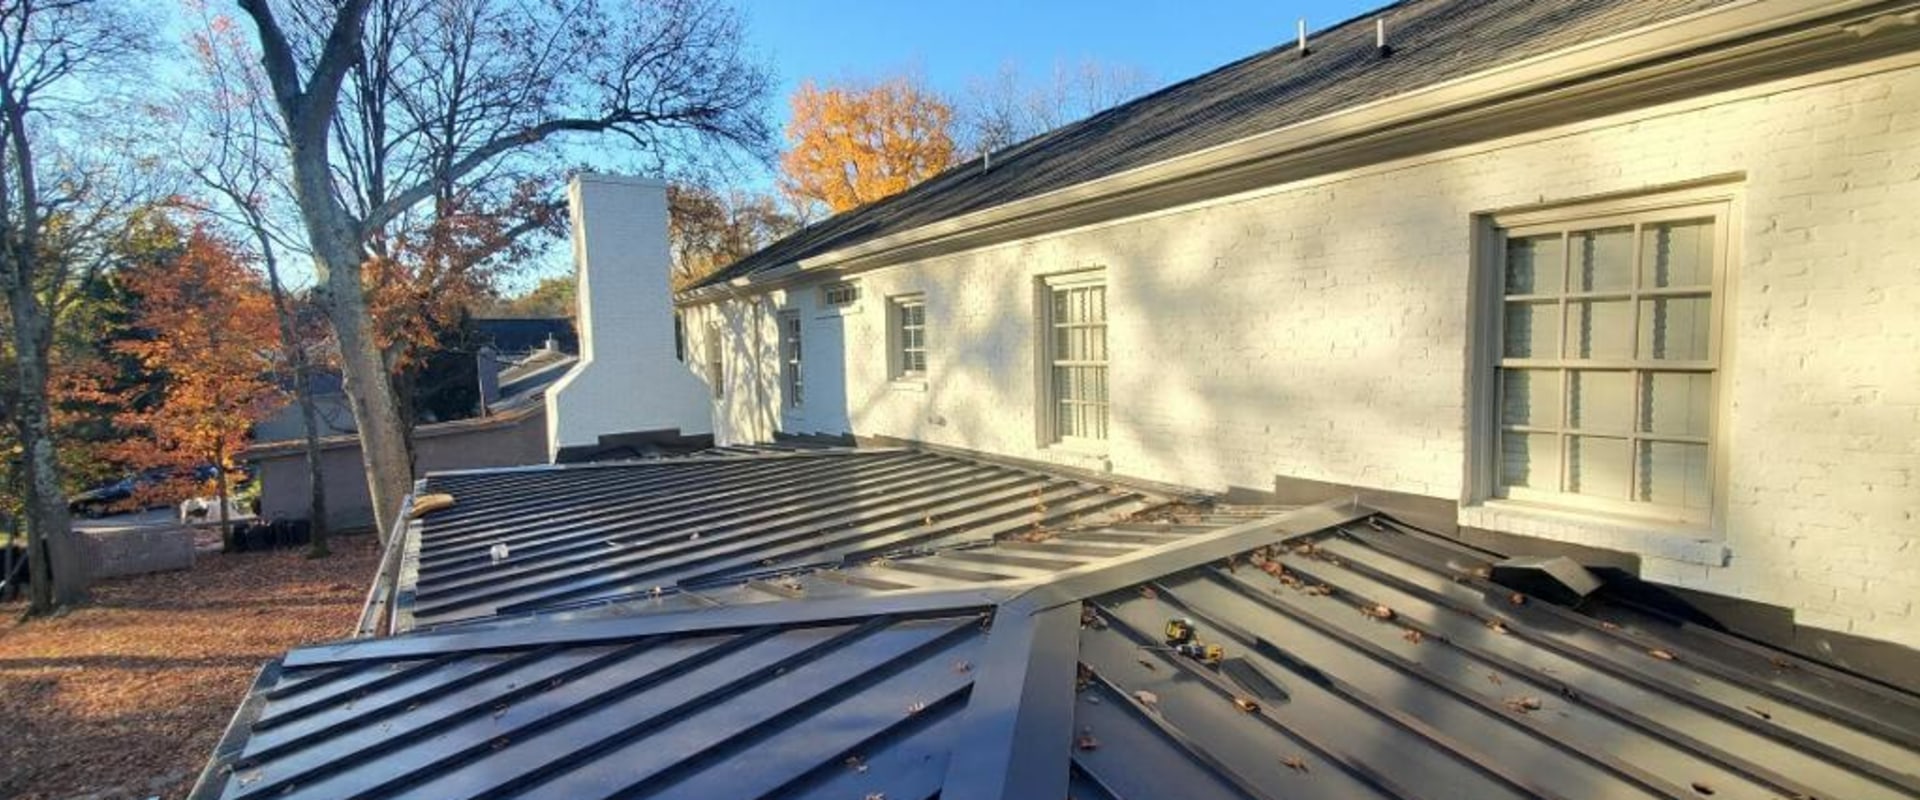 How can you tell how long a roof will last?